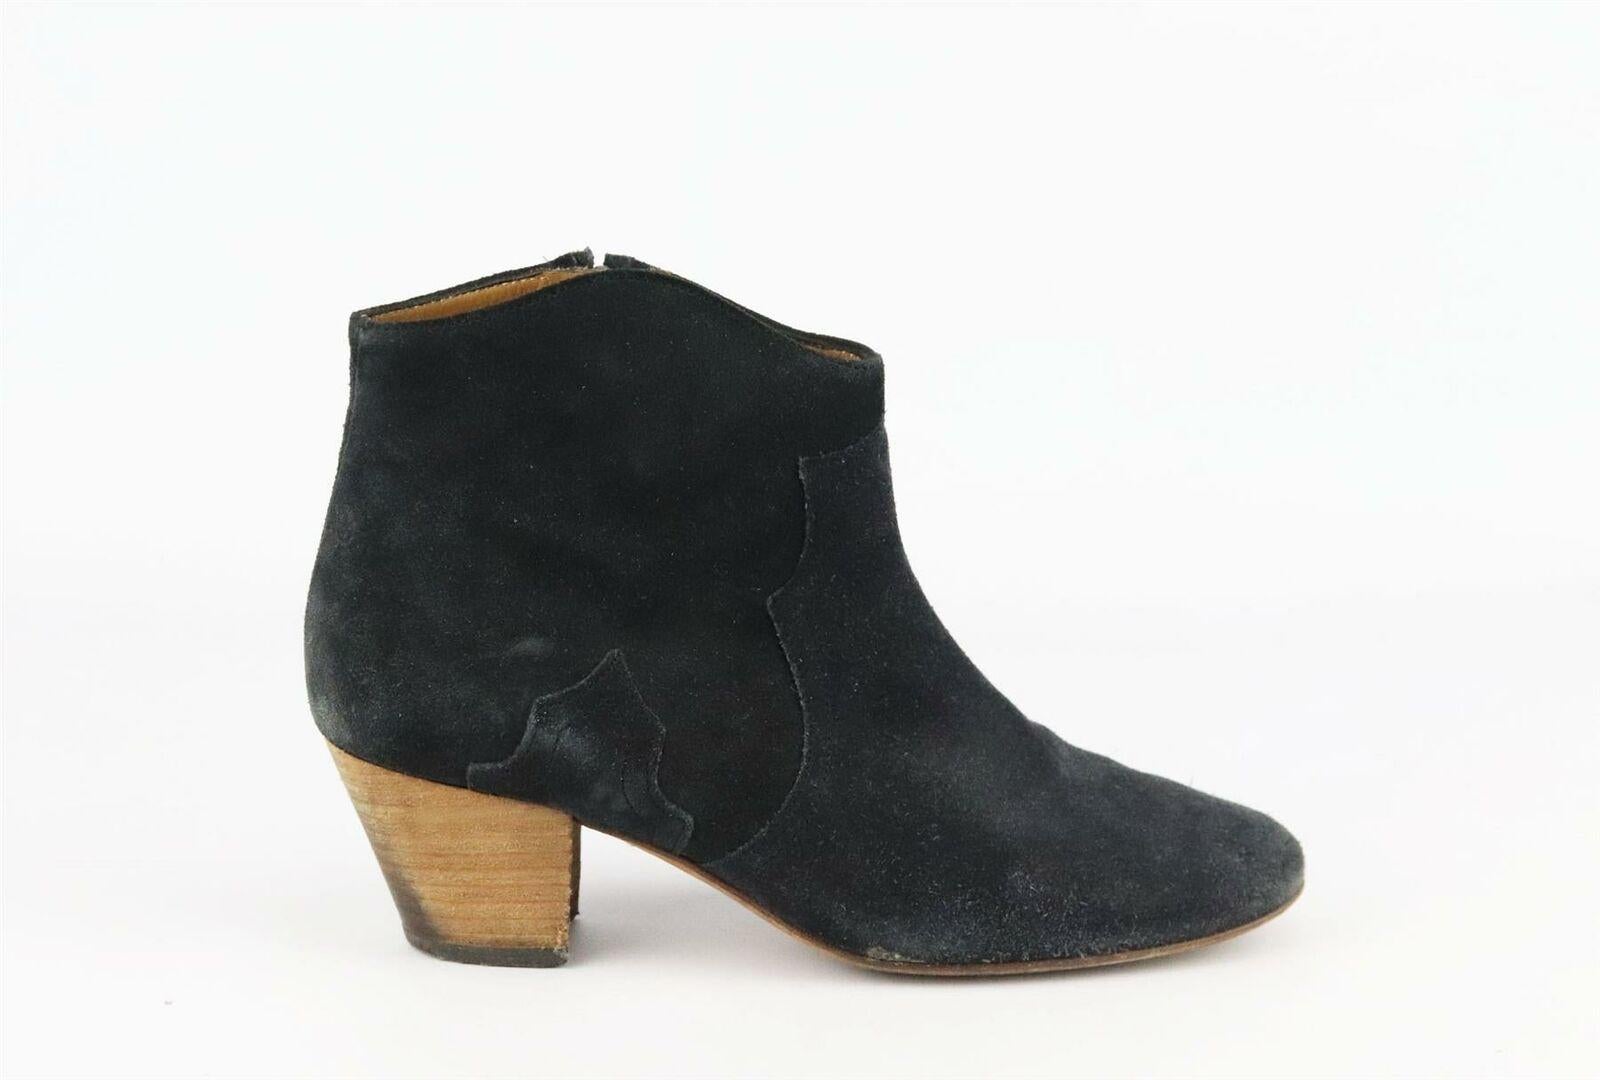 These Isabel Marant 'Dicker' have been crafted from black suede that and set on a stacked 55mm Cuban heel that provides all-day comfort, they'll go with everything from cropped jeans to bohemian dresses.
Heel measures approximately 55 mm/ 2